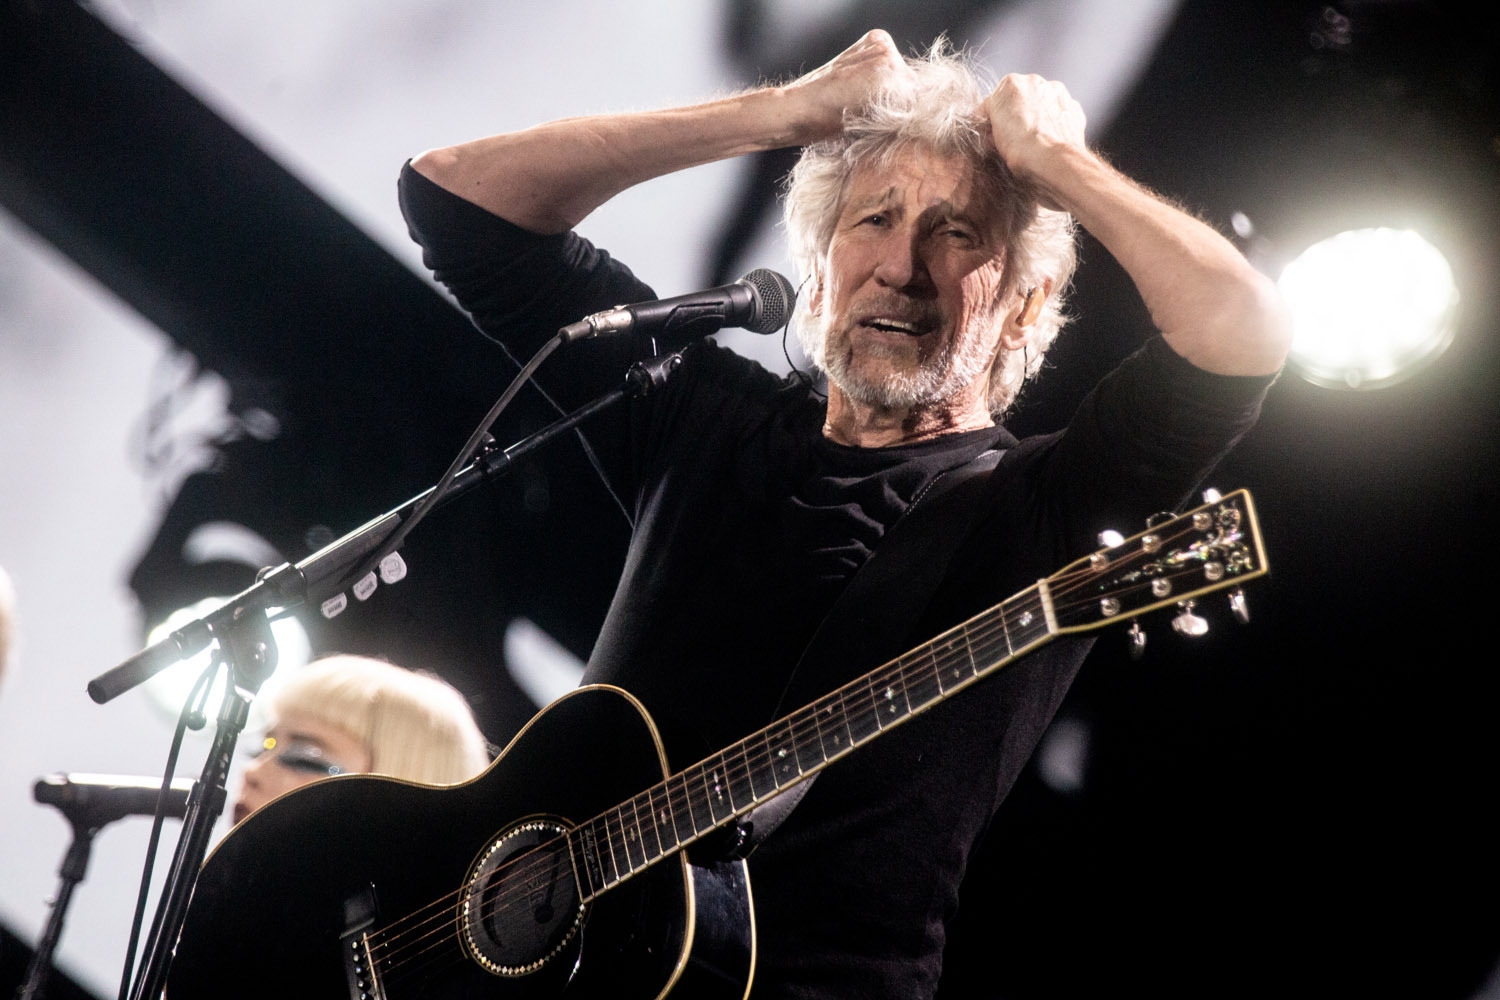 20210617-image-dpa-mb-Roger Waters